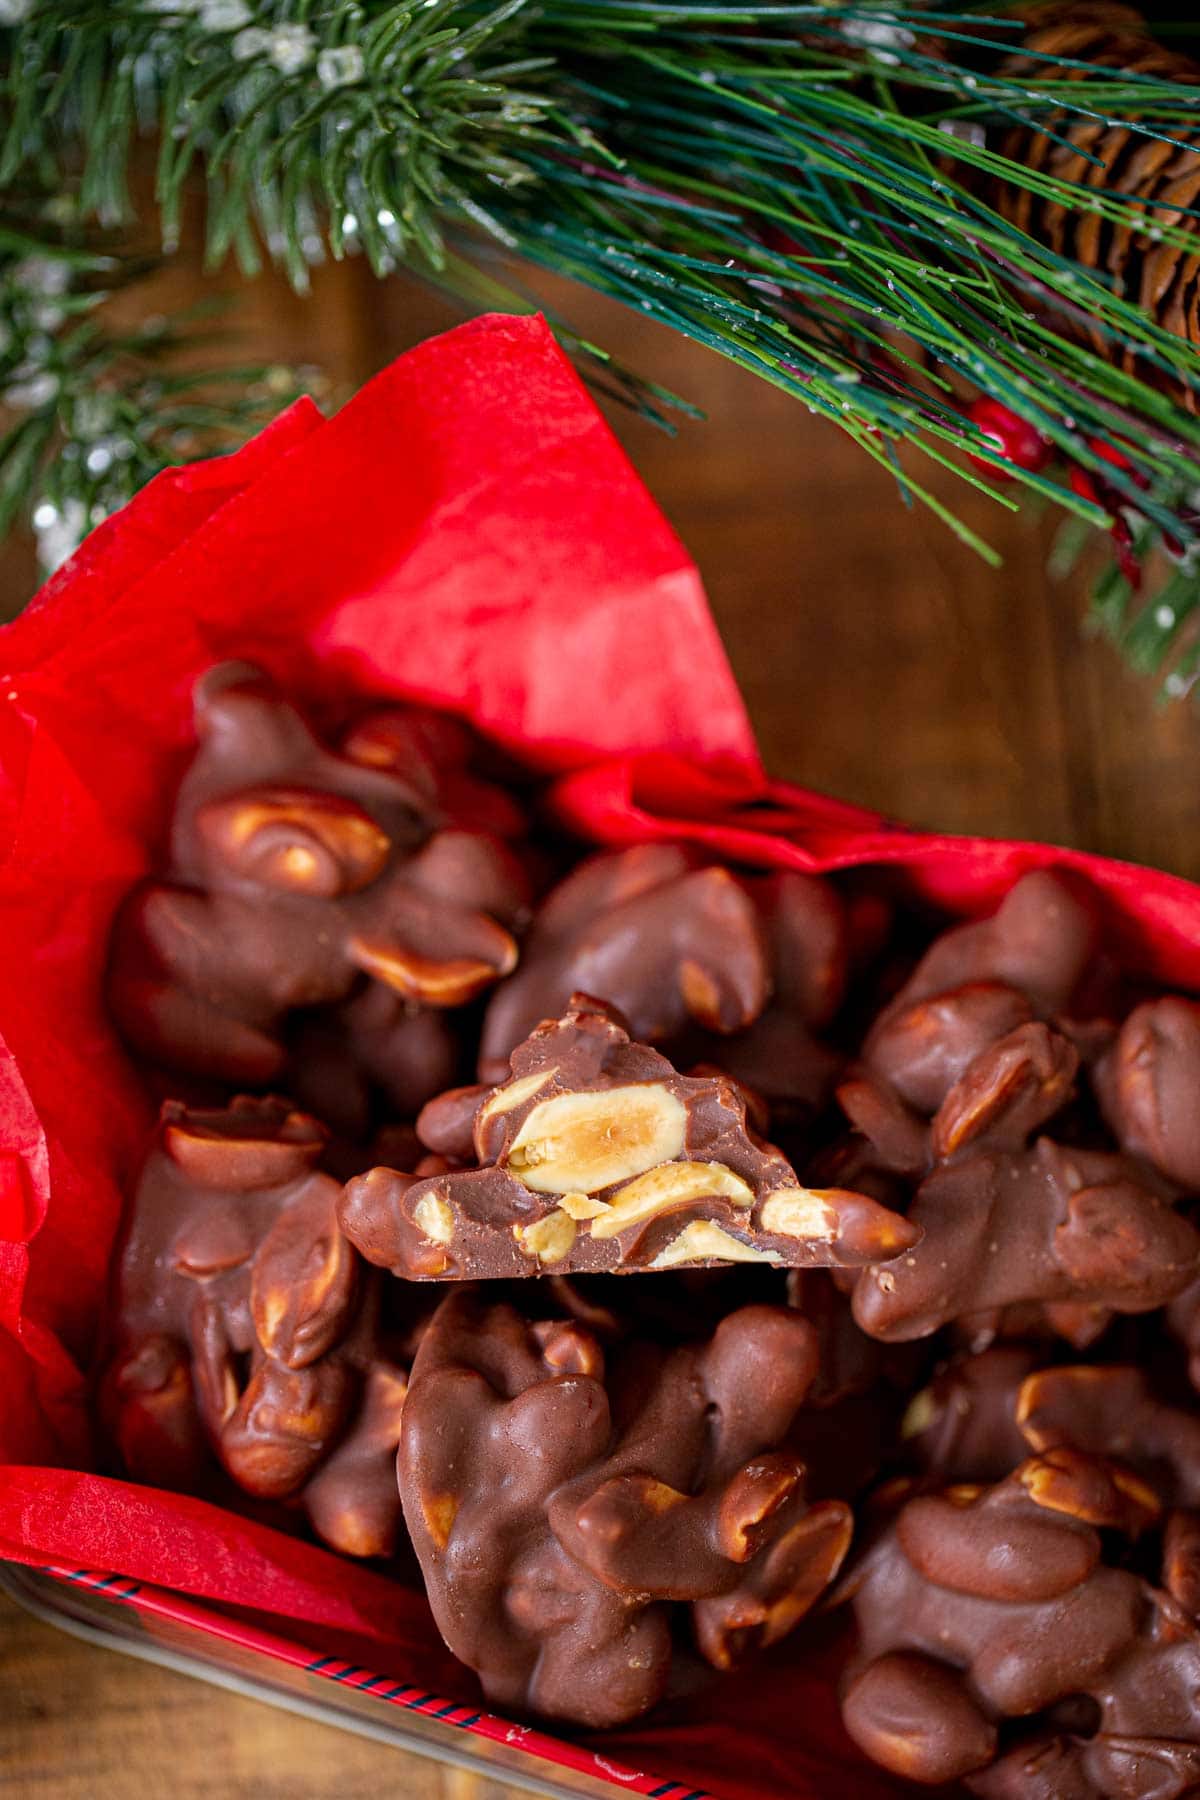 Chocolate Peanut Clusters piled in red tissue lined box with center candy cut in half to show inside